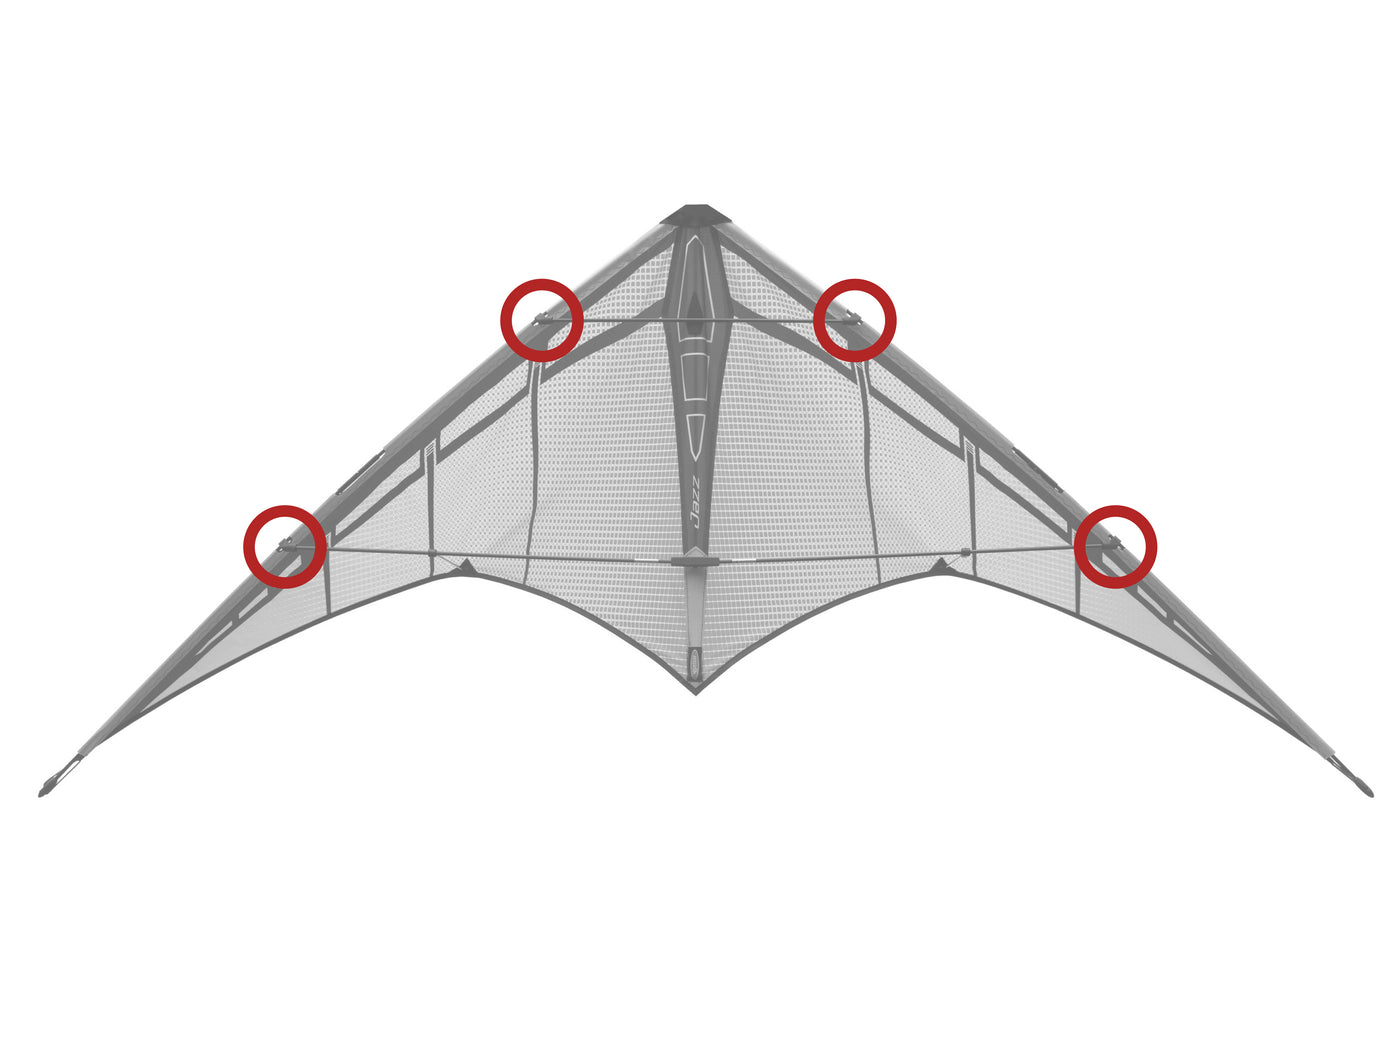 Diagram showing location of the Jazz Leading Edge Fittings on the kite.